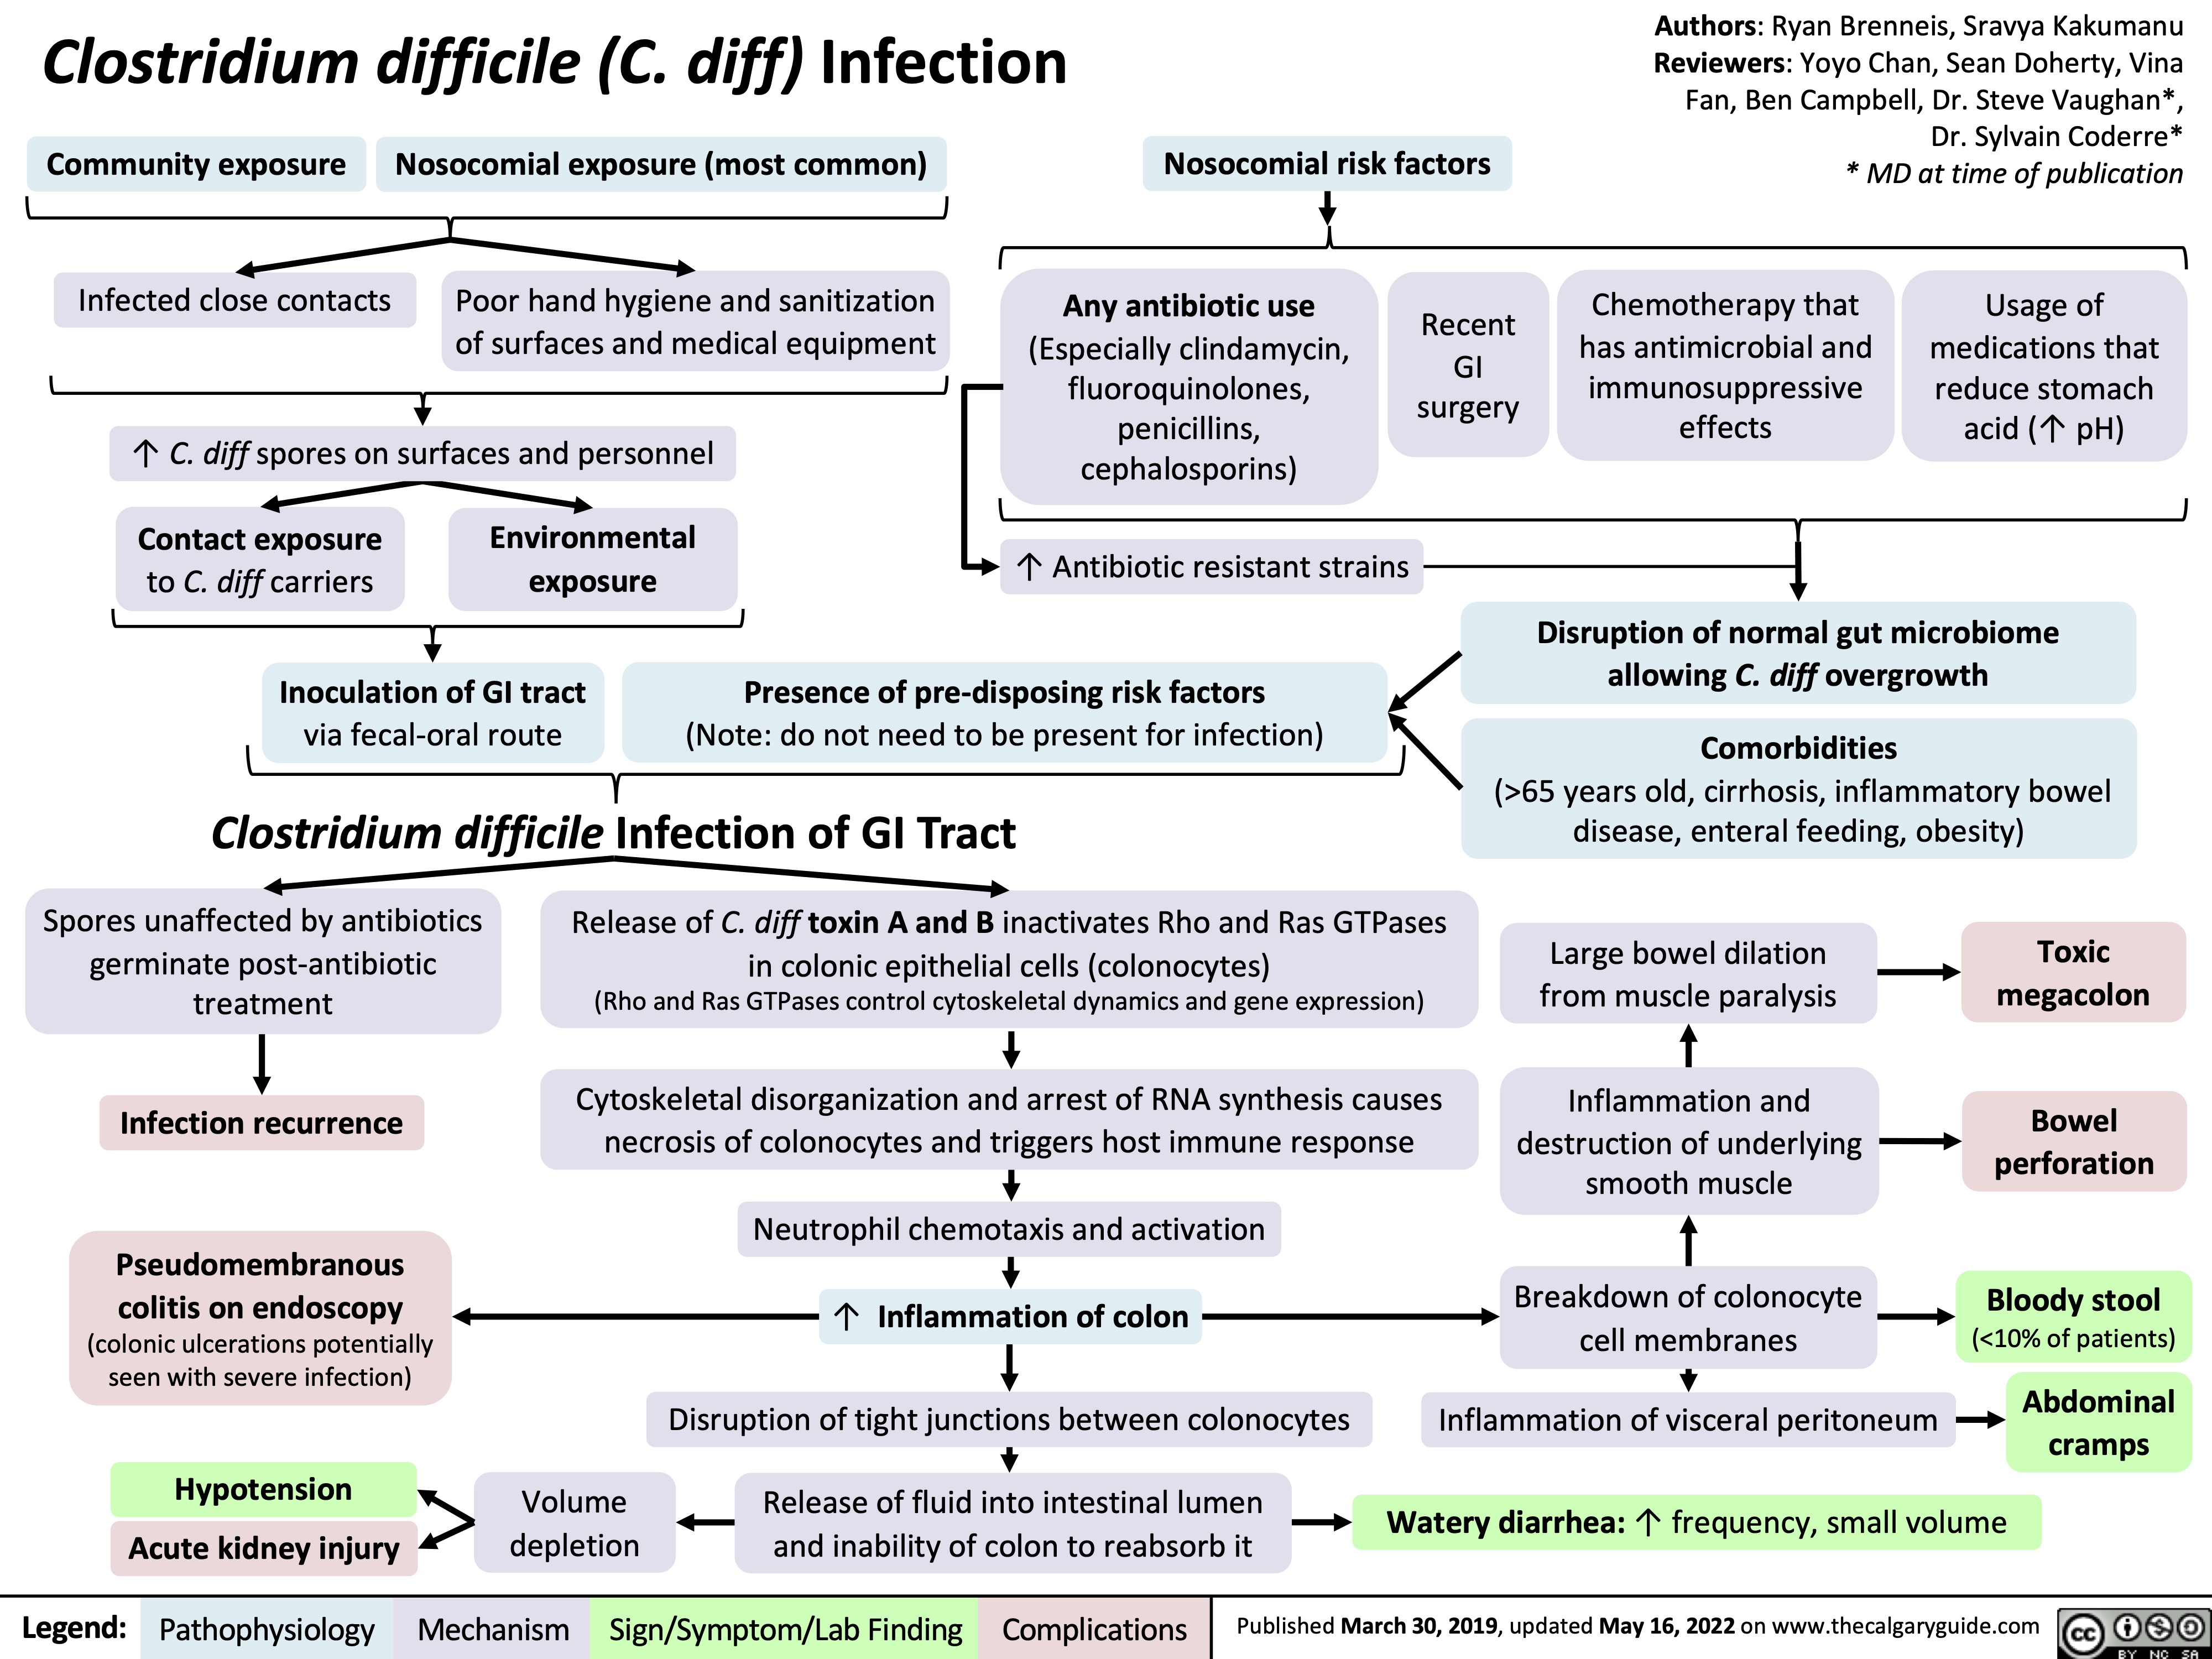 Clostridium difficile (C. diff) Infection
Authors: Ryan Brenneis, Sravya Kakumanu Reviewers: Yoyo Chan, Sean Doherty, Vina Fan, Ben Campbell, Dr. Steve Vaughan*, Dr. Sylvain Coderre* * MD at time of publication
   Community exposure
Infected close contacts
Nosocomial exposure (most common)
Poor hand hygiene and sanitization of surfaces and medical equipment
Nosocomial risk factors
         Any antibiotic use
(Especially clindamycin, fluoroquinolones, penicillins, cephalosporins)
↑ Antibiotic resistant strains
Presence of pre-disposing risk factors
(Note: do not need to be present for infection)
Recent GI surgery
Chemotherapy that has antimicrobial and immunosuppressive effects
Usage of medications that reduce stomach acid (↑ pH)
   ↑ C. diff spores on surfaces and personnel
    Contact exposure
Environmental exposure
 to C. diff carriers
Inoculation of GI tract
Disruption of normal gut microbiome allowing C. diff overgrowth
Comorbidities
(>65 years old, cirrhosis, inflammatory bowel disease, enteral feeding, obesity)
     via fecal-oral route
  Clostridium difficile Infection of GI Tract
    Spores unaffected by antibiotics germinate post-antibiotic treatment
Infection recurrence
Pseudomembranous colitis on endoscopy
(colonic ulcerations potentially seen with severe infection)
Hypotension Acute kidney injury
Release of C. diff toxin A and B inactivates Rho and Ras GTPases in colonic epithelial cells (colonocytes)
(Rho and Ras GTPases control cytoskeletal dynamics and gene expression)
Cytoskeletal disorganization and arrest of RNA synthesis causes necrosis of colonocytes and triggers host immune response
Neutrophil chemotaxis and activation
↑ Inflammation of colon
Disruption of tight junctions between colonocytes
Release of fluid into intestinal lumen and inability of colon to reabsorb it
Toxic megacolon
Bowel perforation
Bloody stool
(<10% of patients)
Abdominal cramps
  Large bowel dilation from muscle paralysis
Inflammation and destruction of underlying smooth muscle
Breakdown of colonocyte cell membranes
Inflammation of visceral peritoneum
                 Volume depletion
Watery diarrhea: ↑ frequency, small volume
   Legend:
 Pathophysiology
Mechanism
Sign/Symptom/Lab Finding
 Complications
 Published March 30, 2019, updated May 16, 2022 on www.thecalgaryguide.com
   